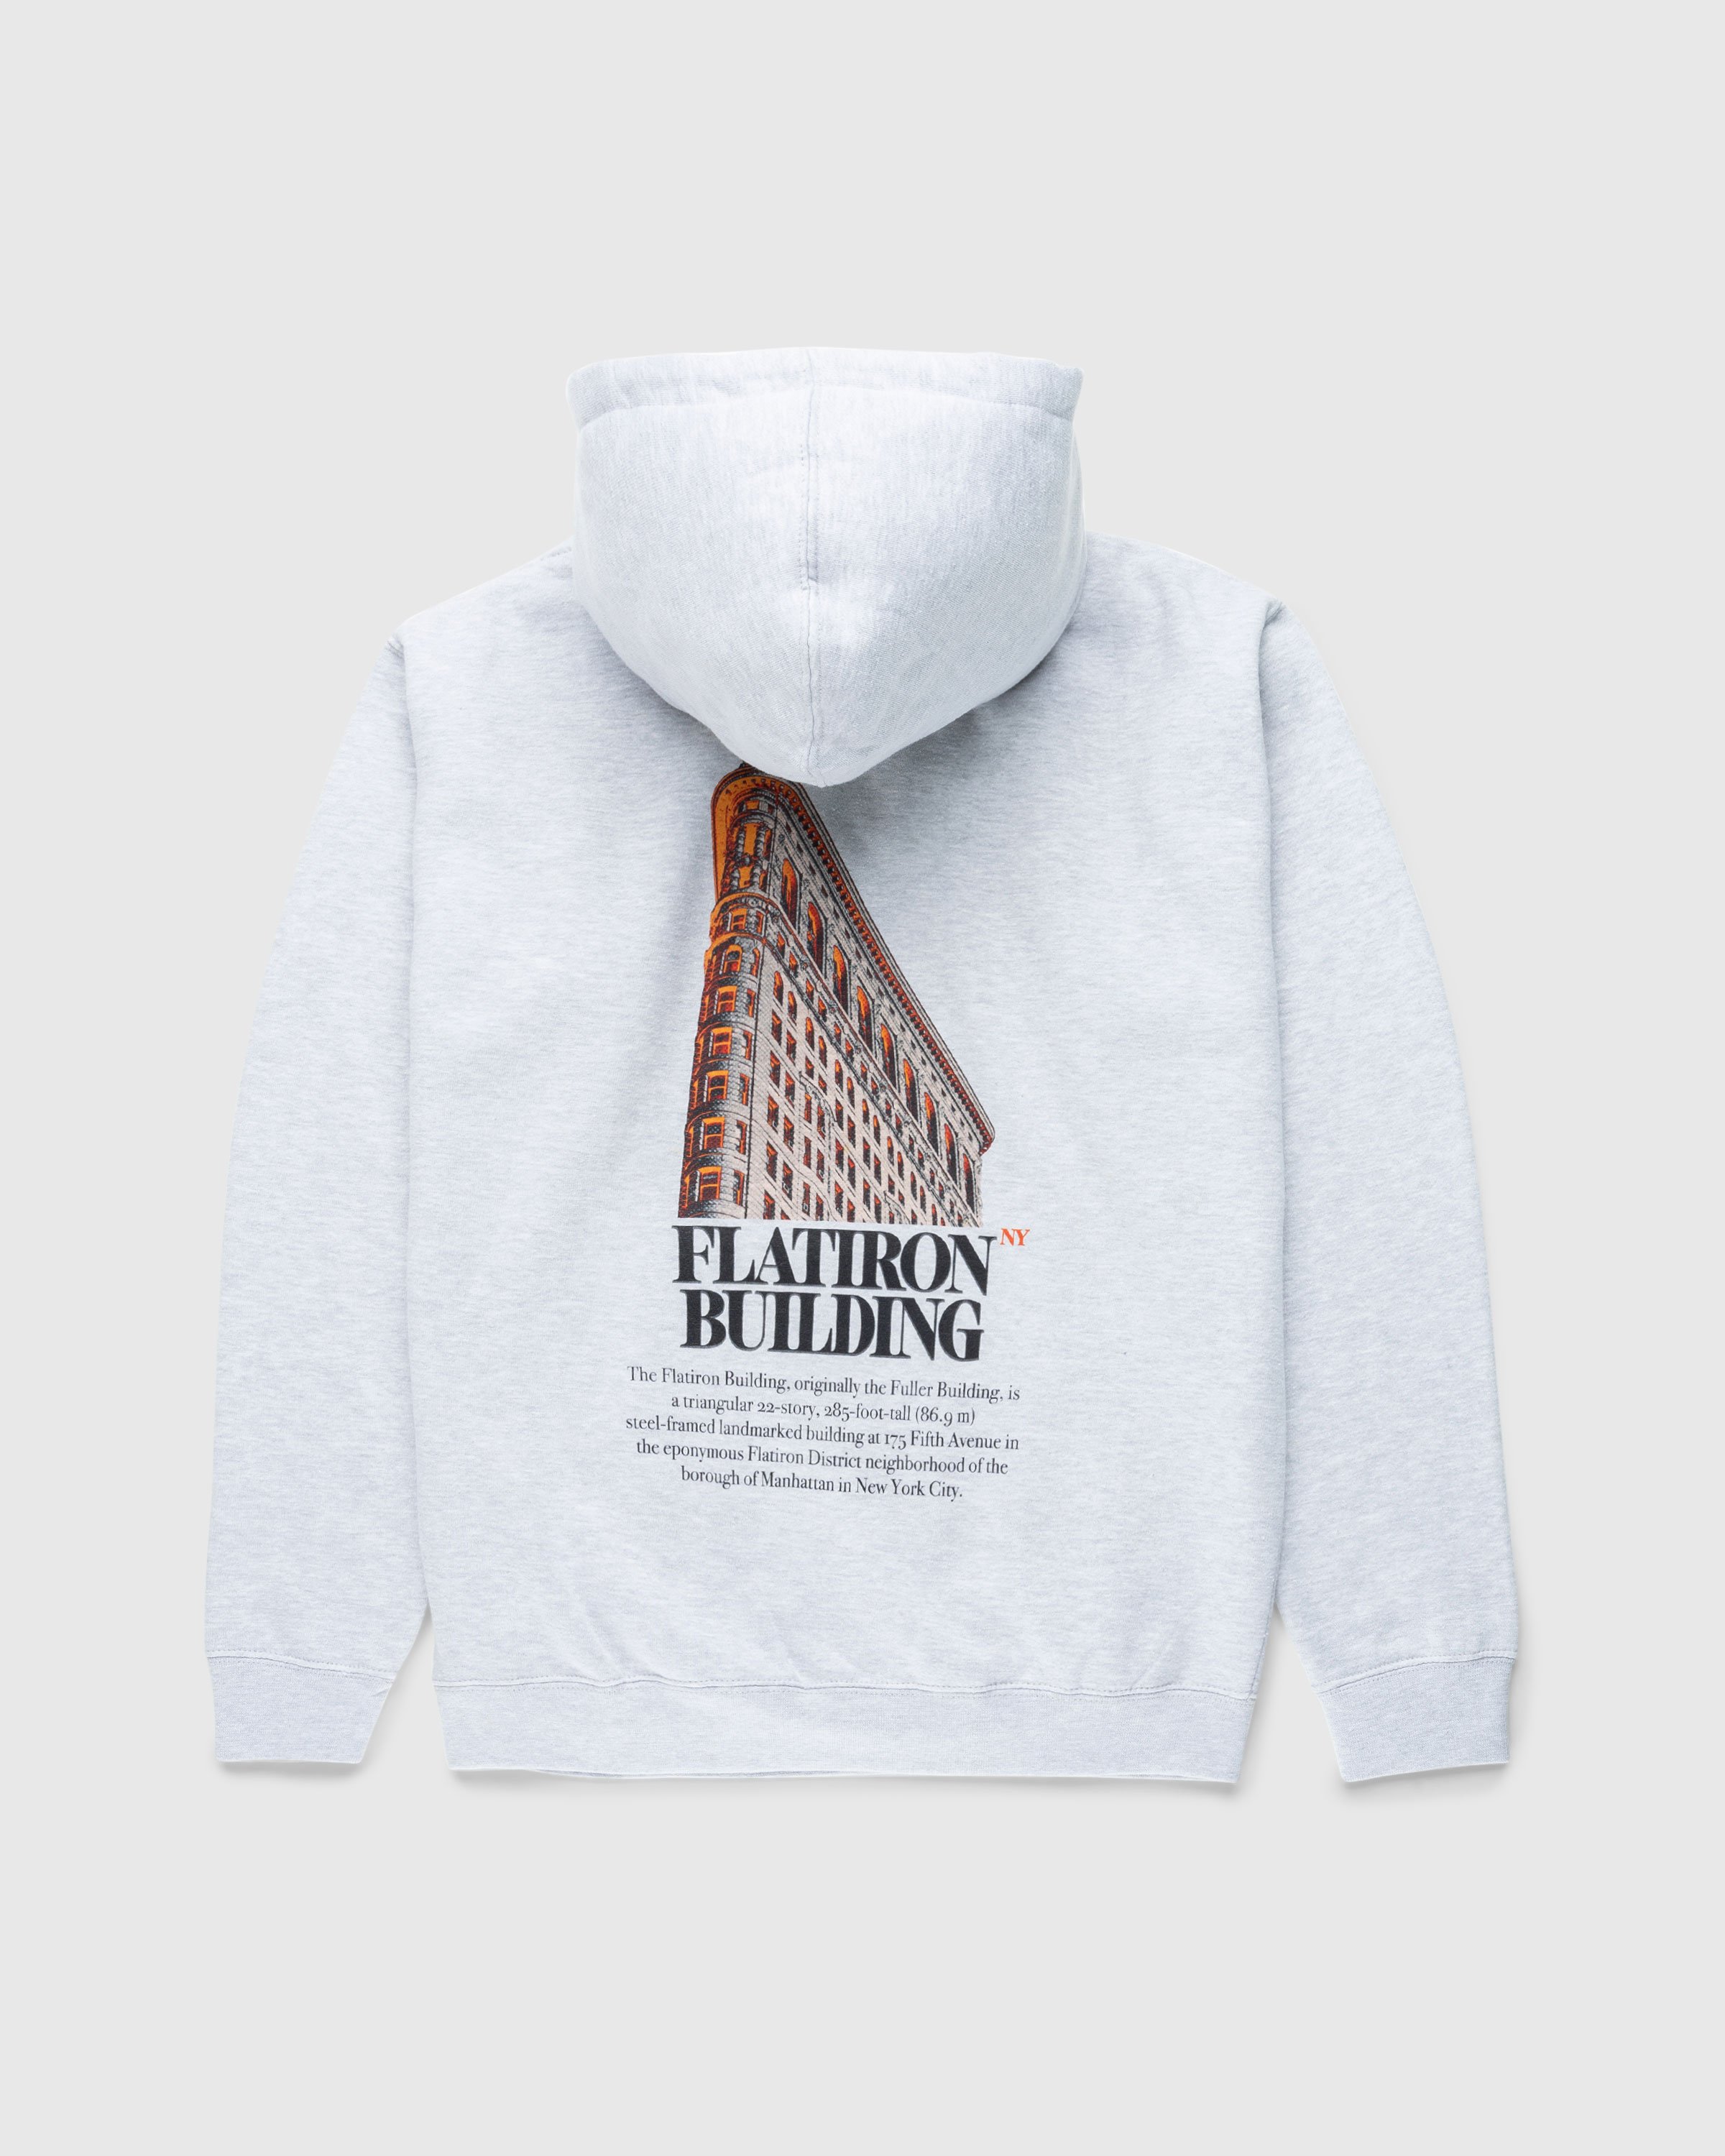 At The Moment x Highsnobiety - Flatiron Building Hoodie - Clothing - Grey - Image 1